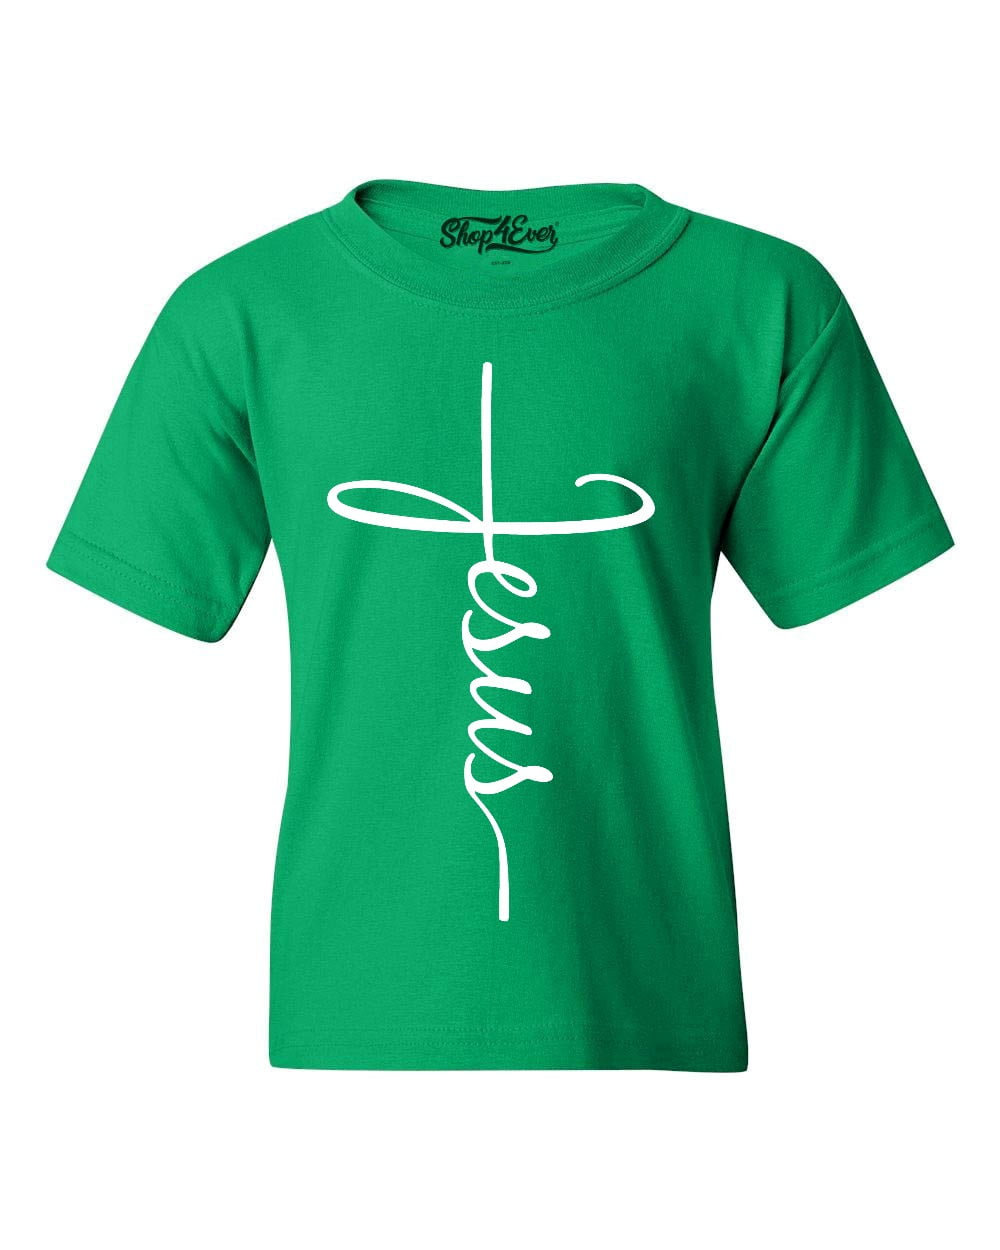 Shop4Ever Kids Jesus Cross Religious Graphic Child's Youth T-Shirt ...